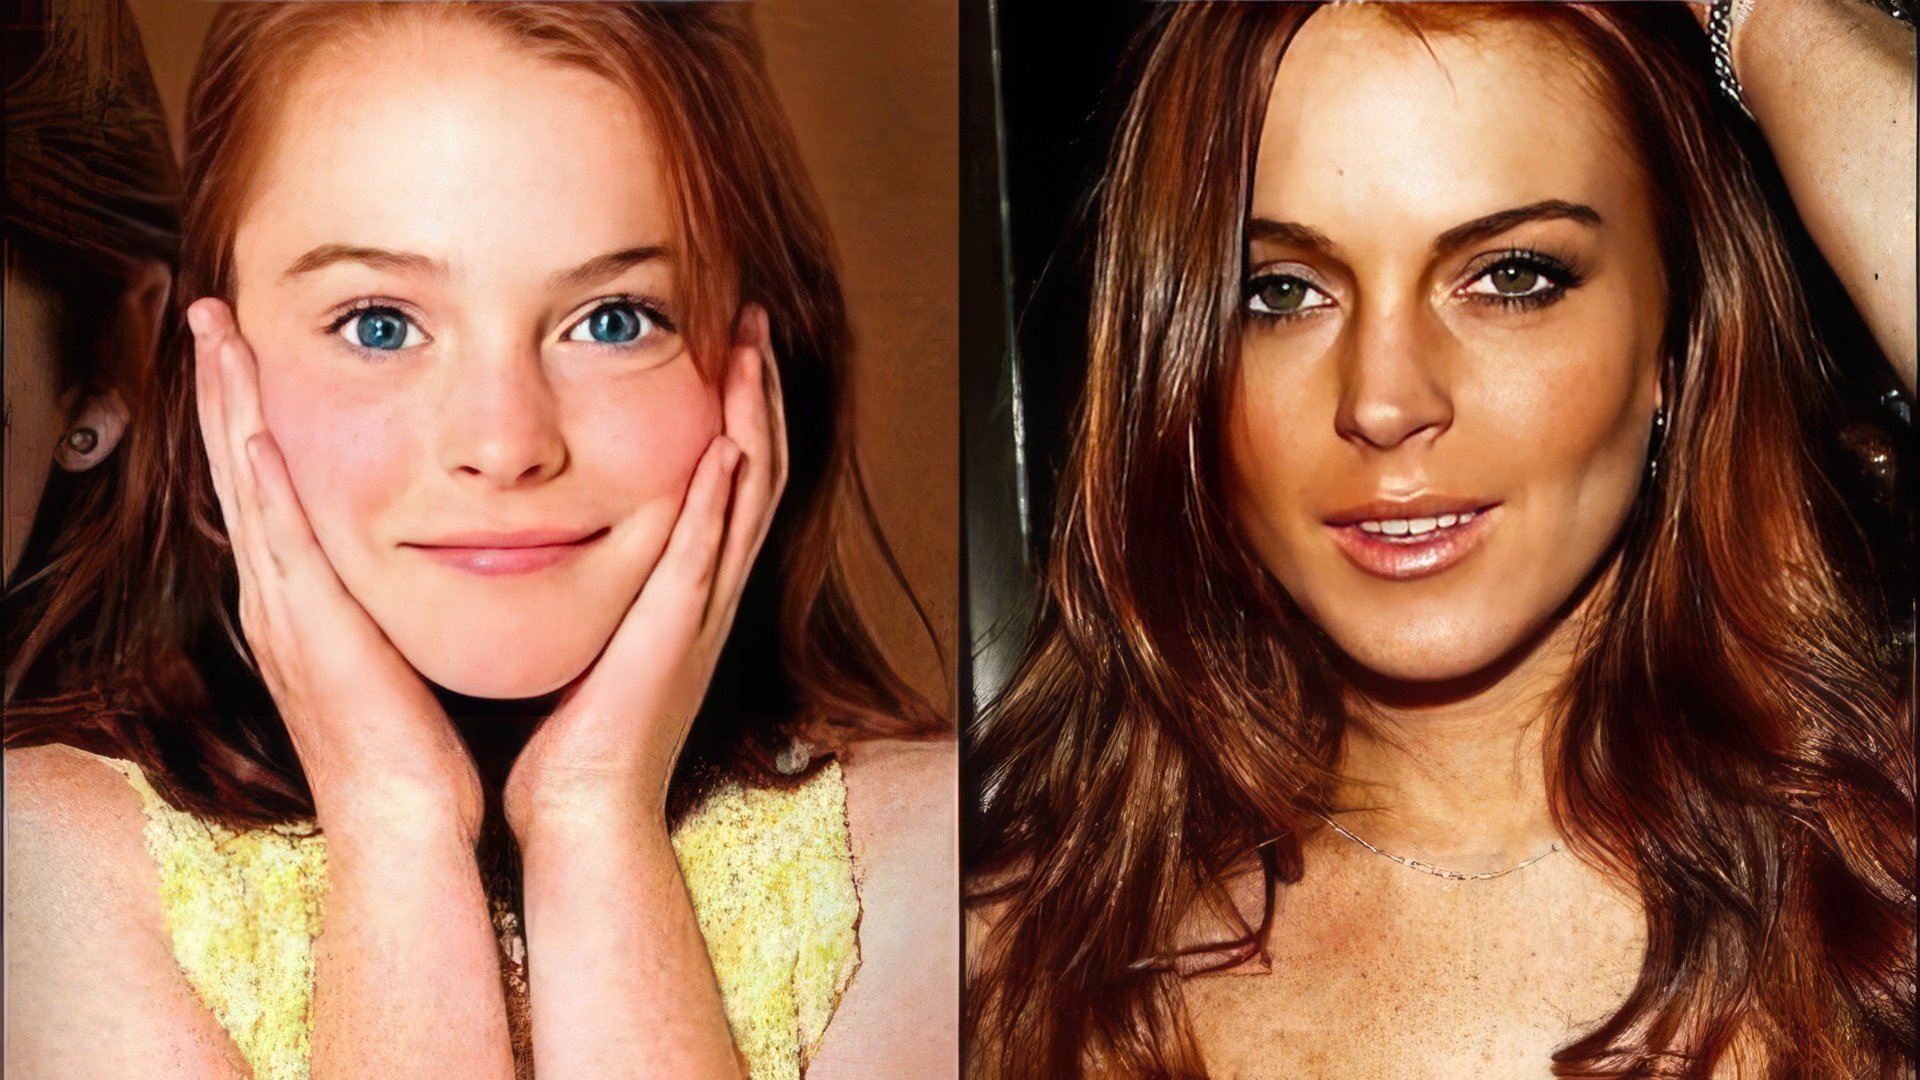 Lindsay Lohan in childhood and at the age of 25 years